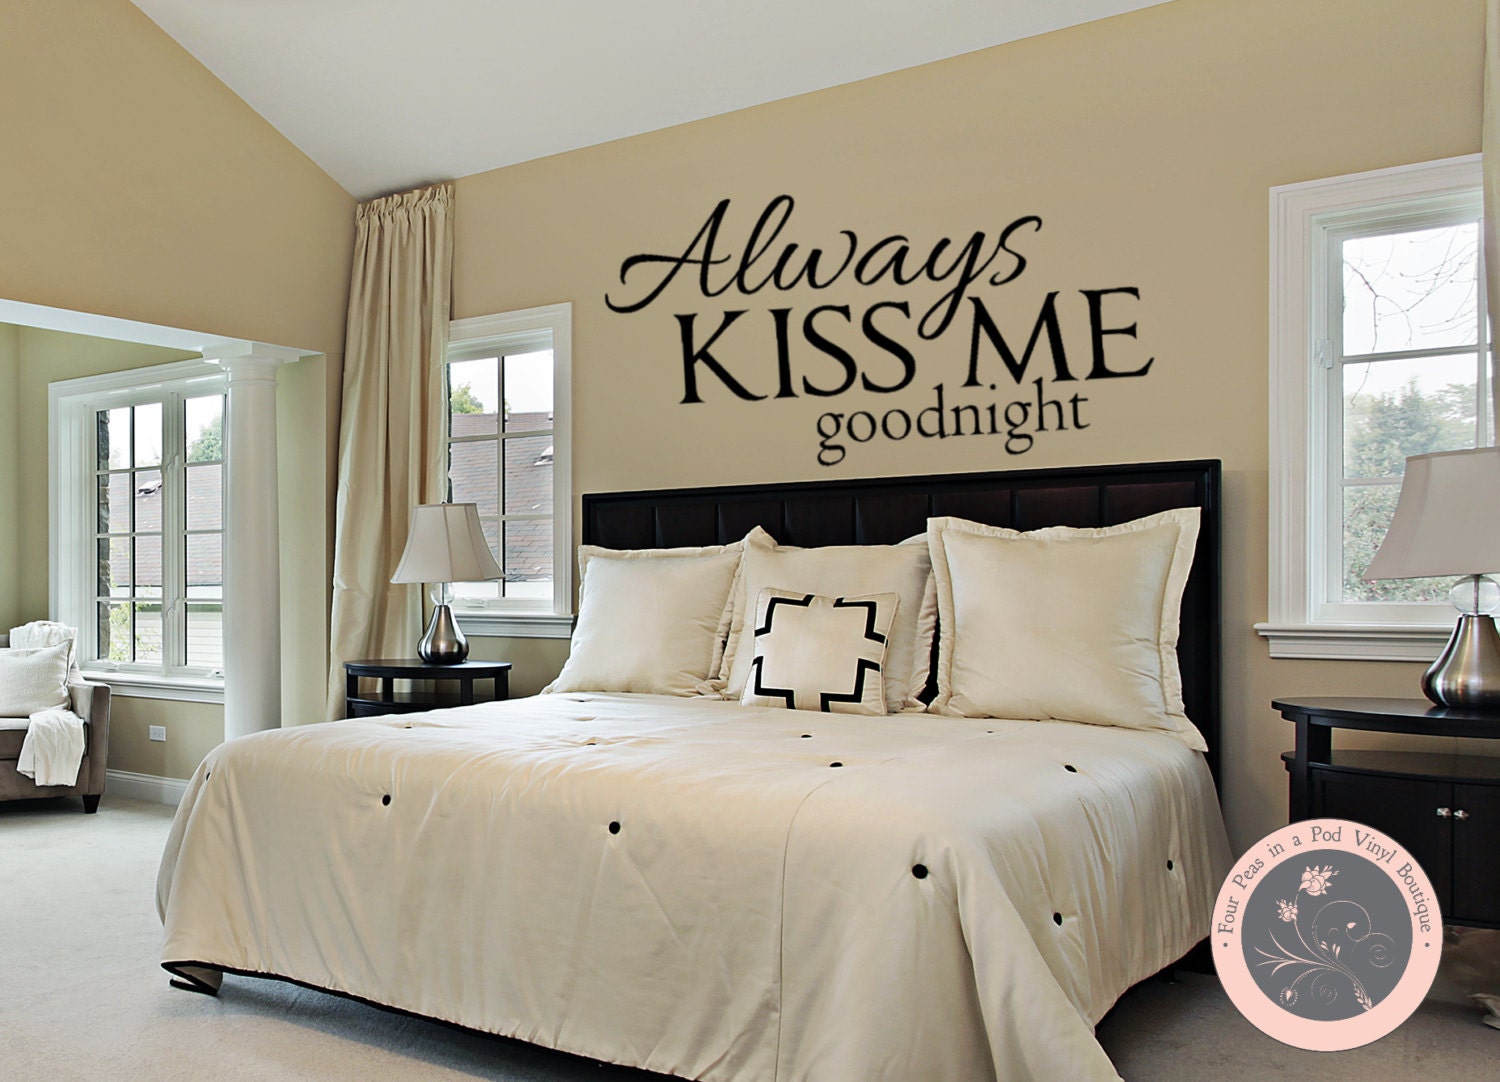 Bedroom Wall Decal Always Kiss Me Goodnight Master Bedroom Decor Bedroom Wall Decals Vinyl Wall Decals Kiss Me Goodnight